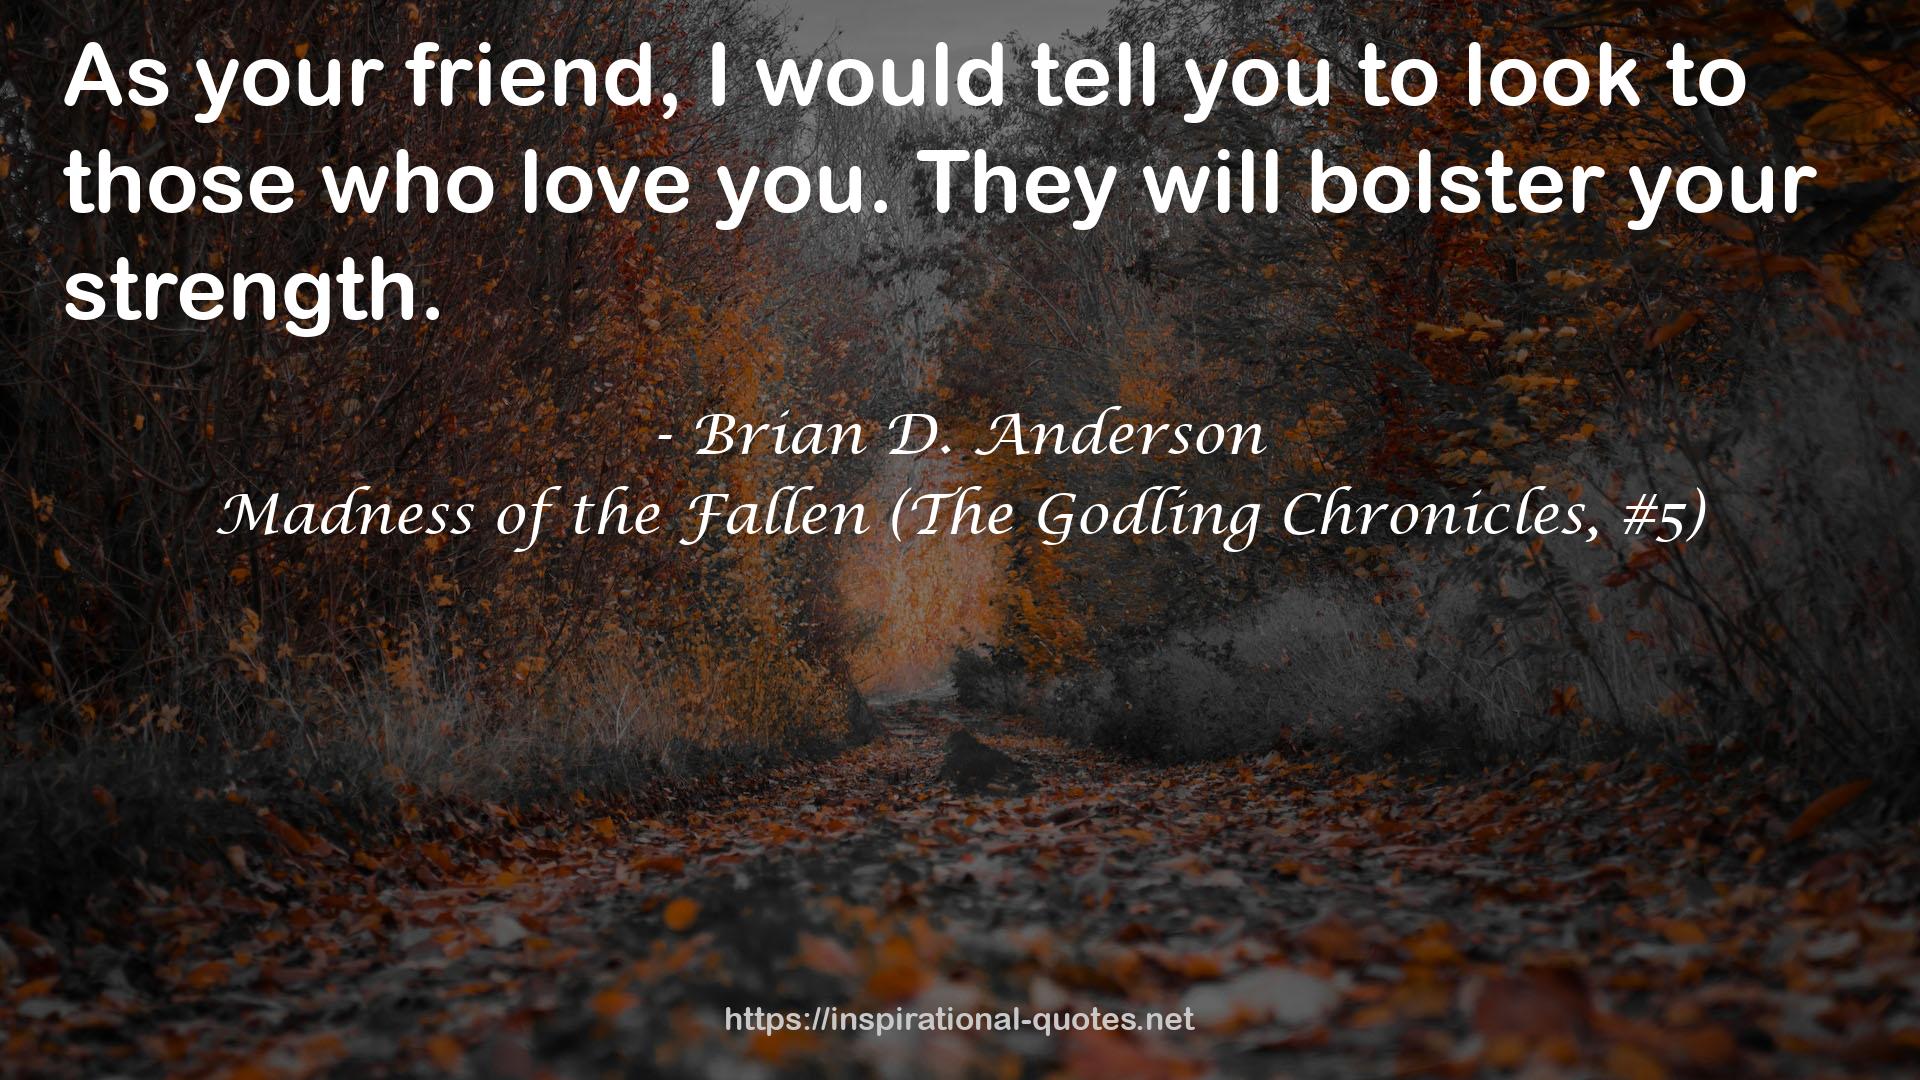 Madness of the Fallen (The Godling Chronicles, #5) QUOTES